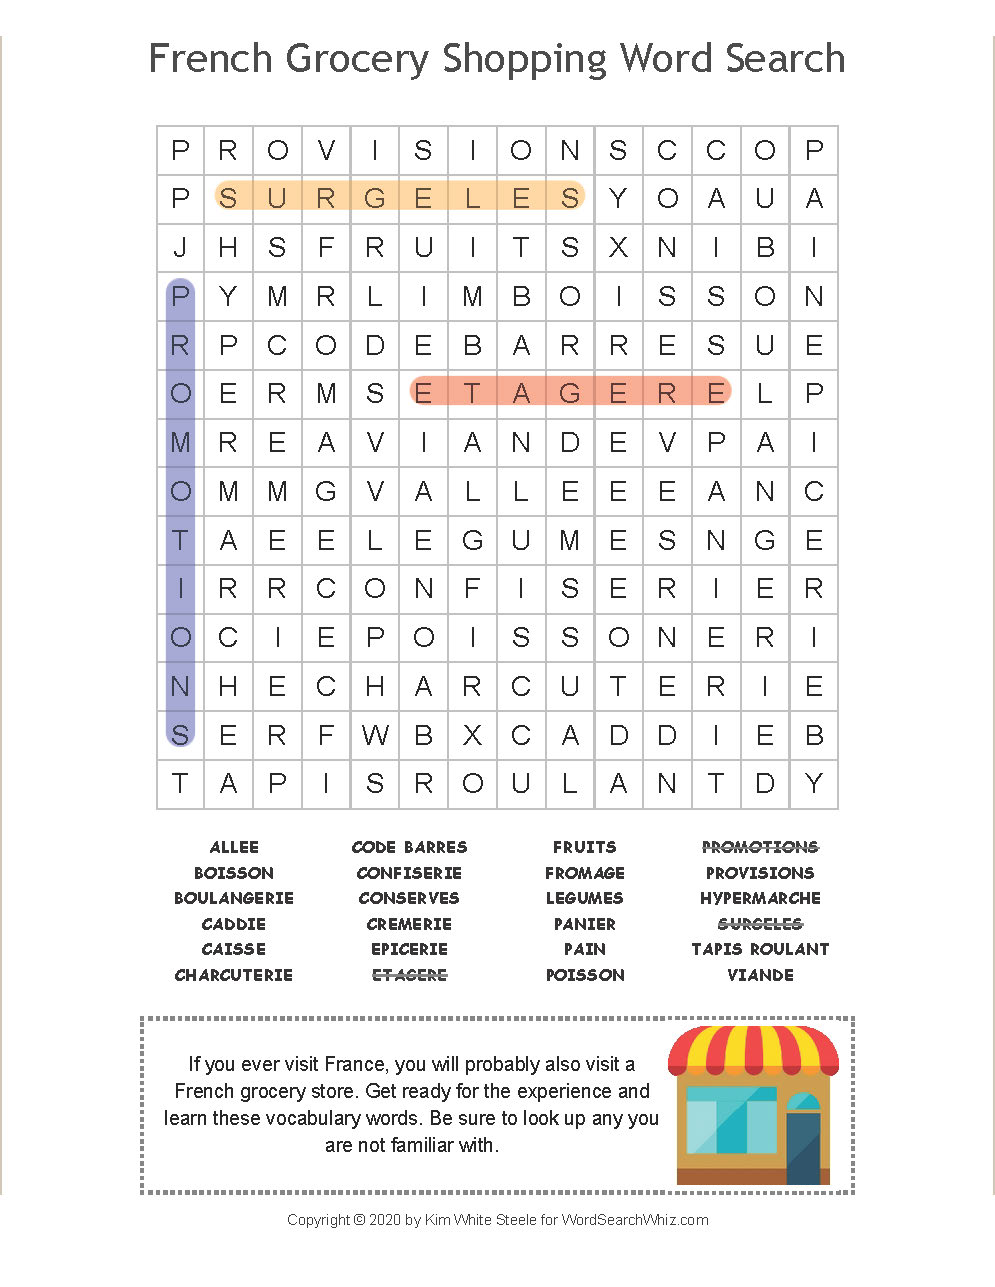 French Grocery Shopping Word Search